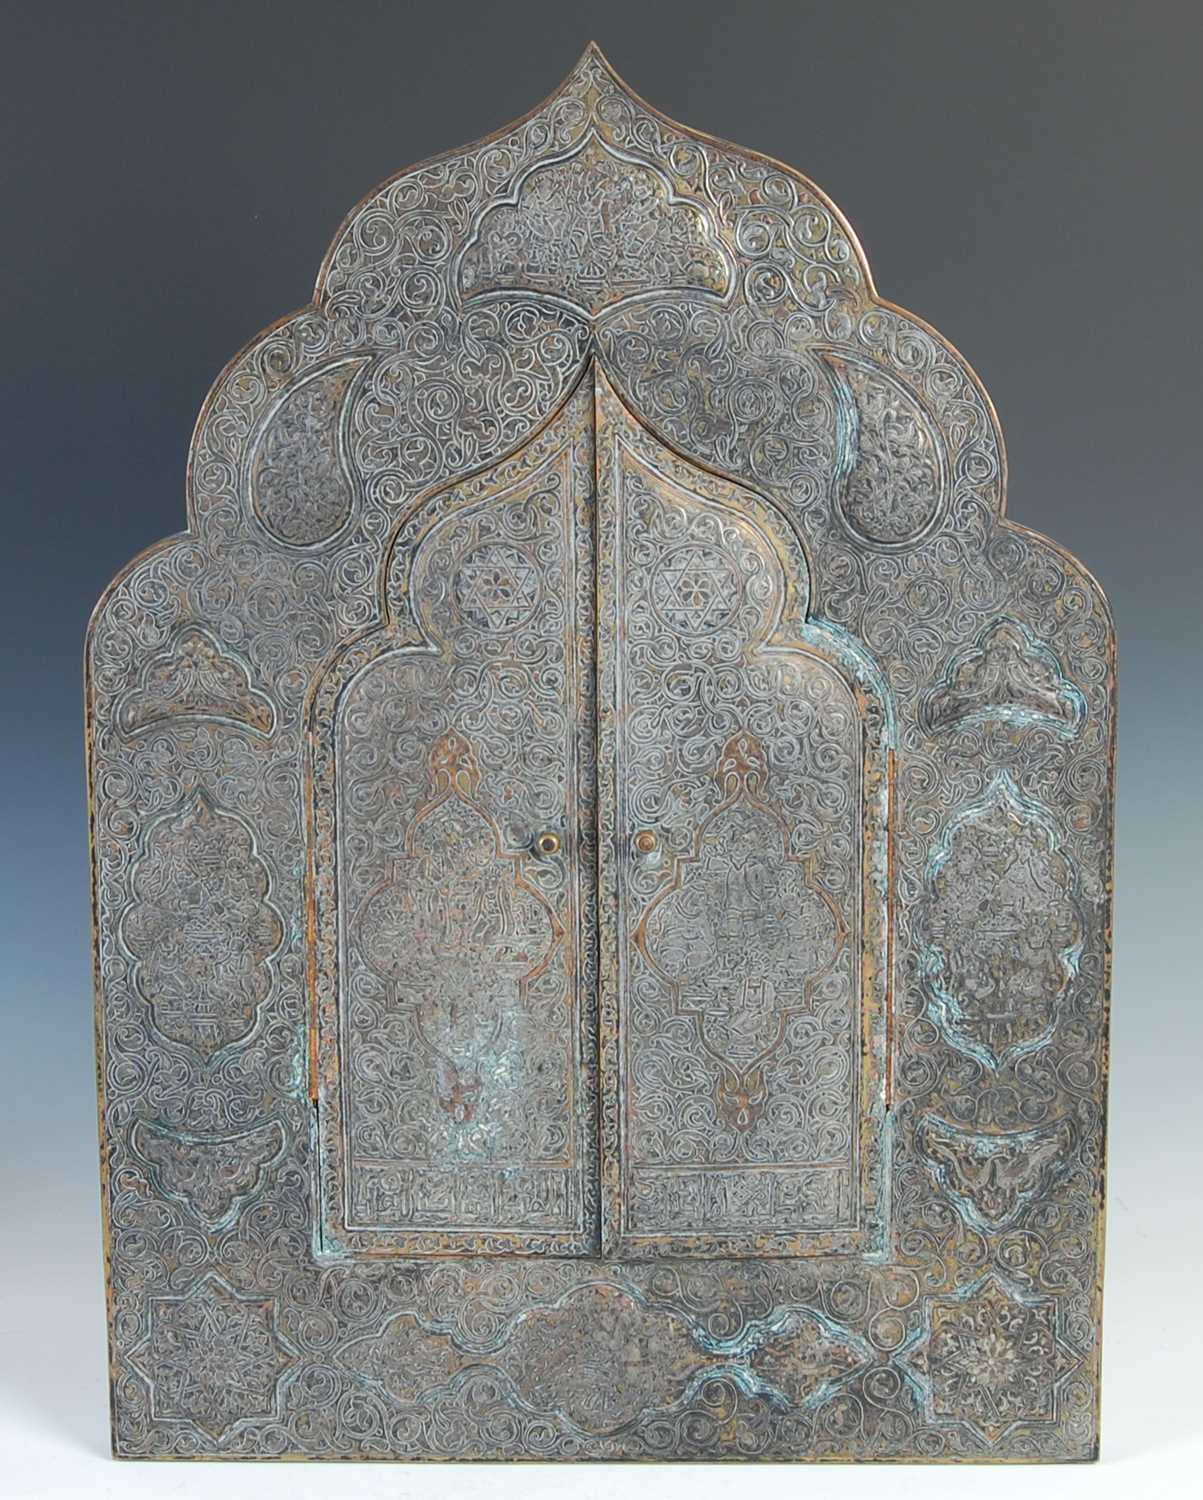 A 19th century Persian brass, copper and white metal inlaid mihrab shaped wall mirror, with a pair